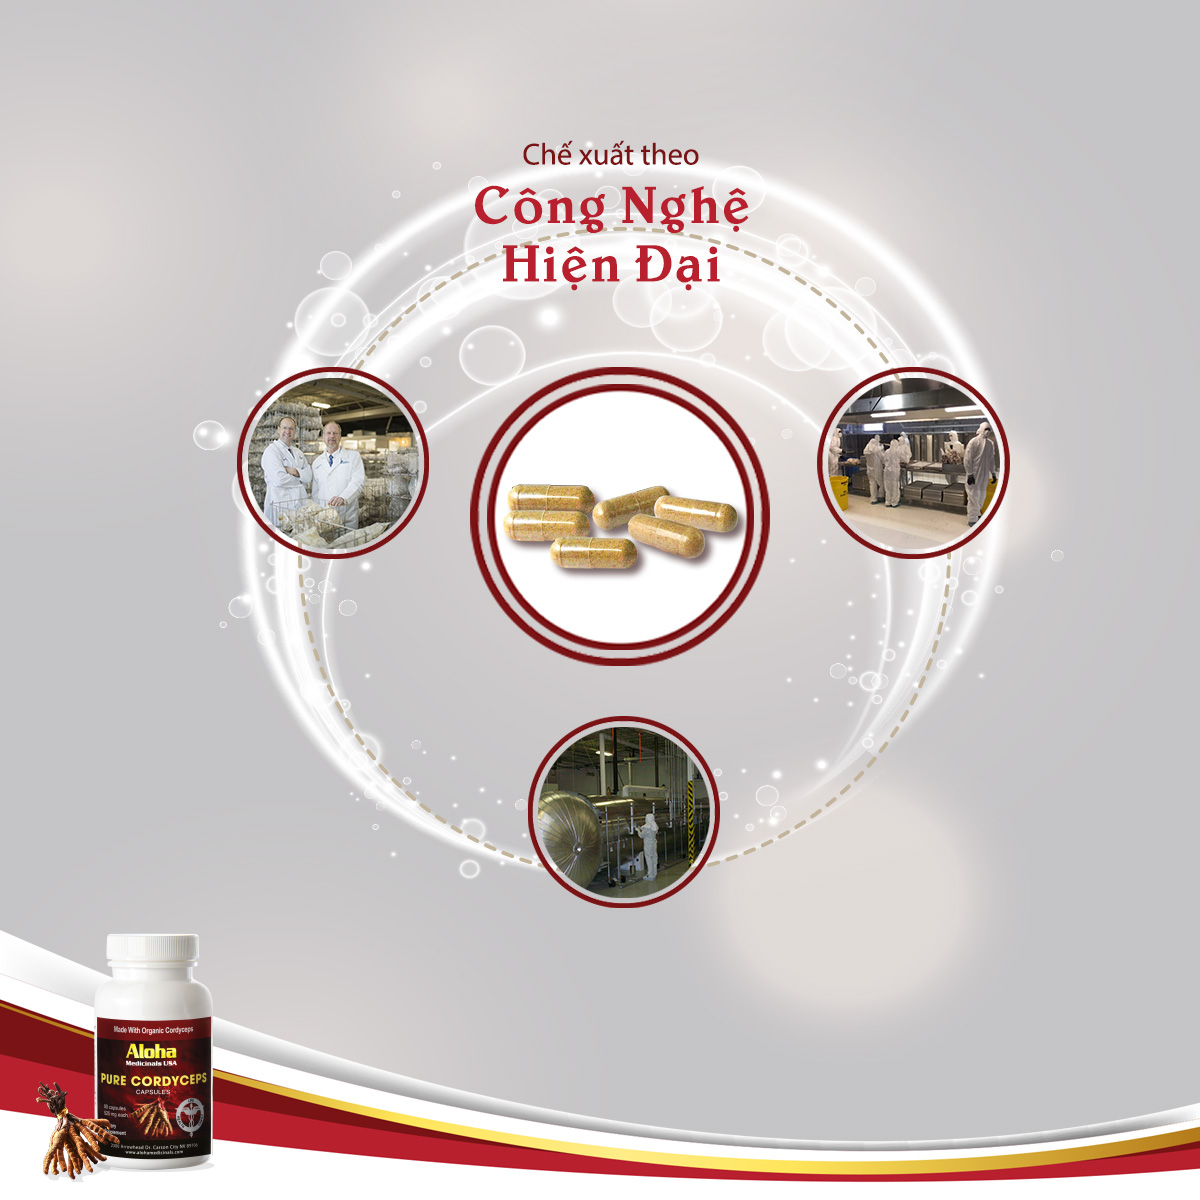 cong-nghe-che-suat-dong-trung-ha-thao-cua-my